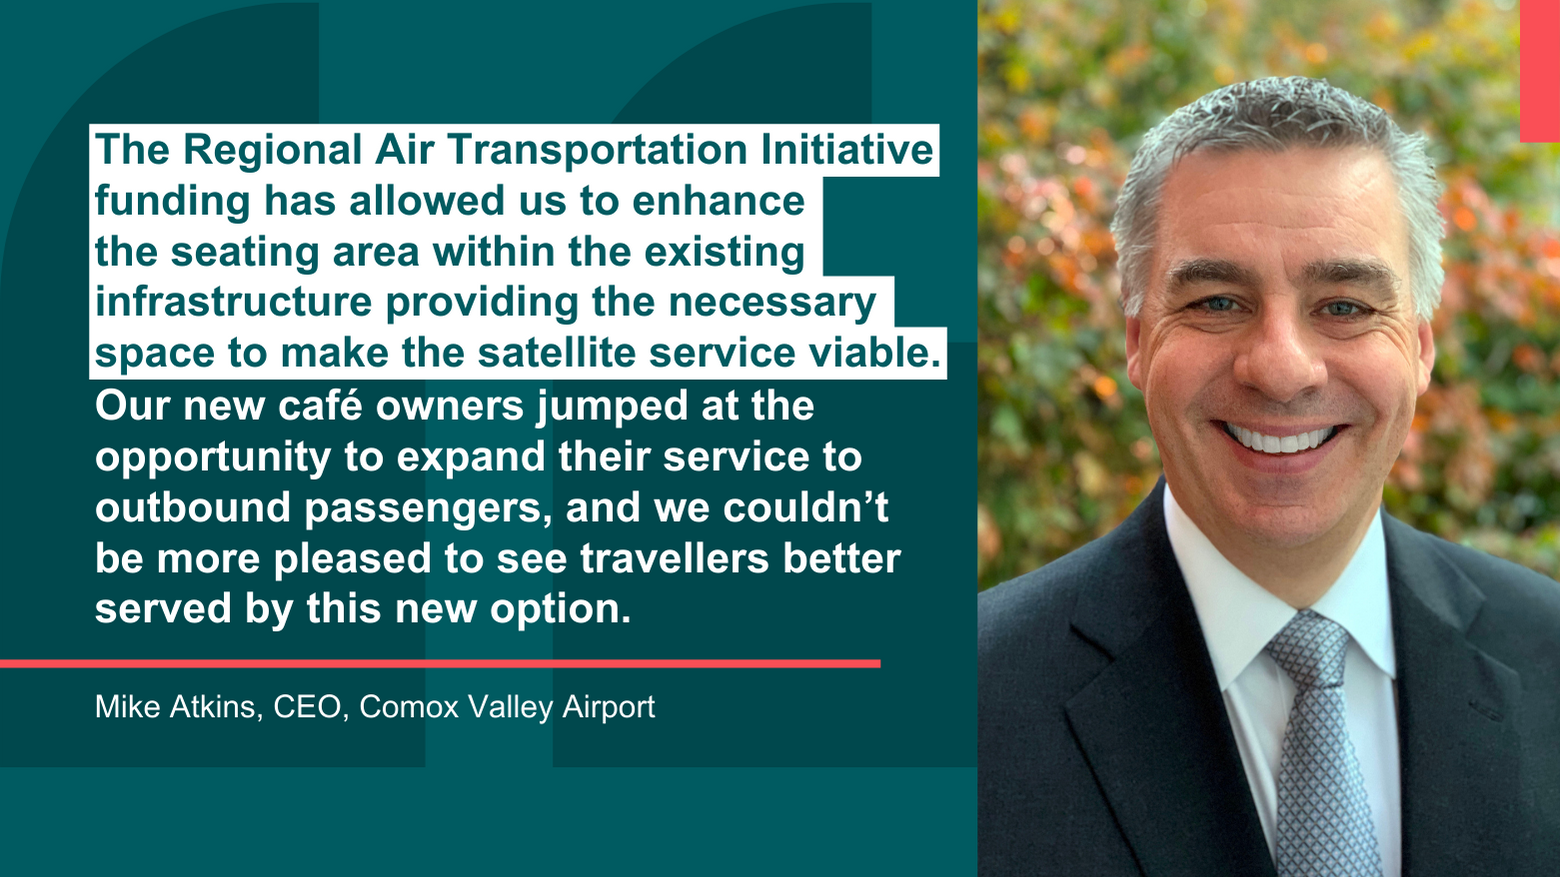 Headshot image of Mike Atkins CEO of Comox Valley Airport next to his quote that reads The Regional Air Transportation Initiative funding has allowed us to enhance  the seating area within the existing infrastructure providing the necessary  space to make the satellite service viable. Our new café owners jumped at the opportunity to expand their service to outbound passengers, and we couldn’t  be more pleased to see travellers better served by this new option.